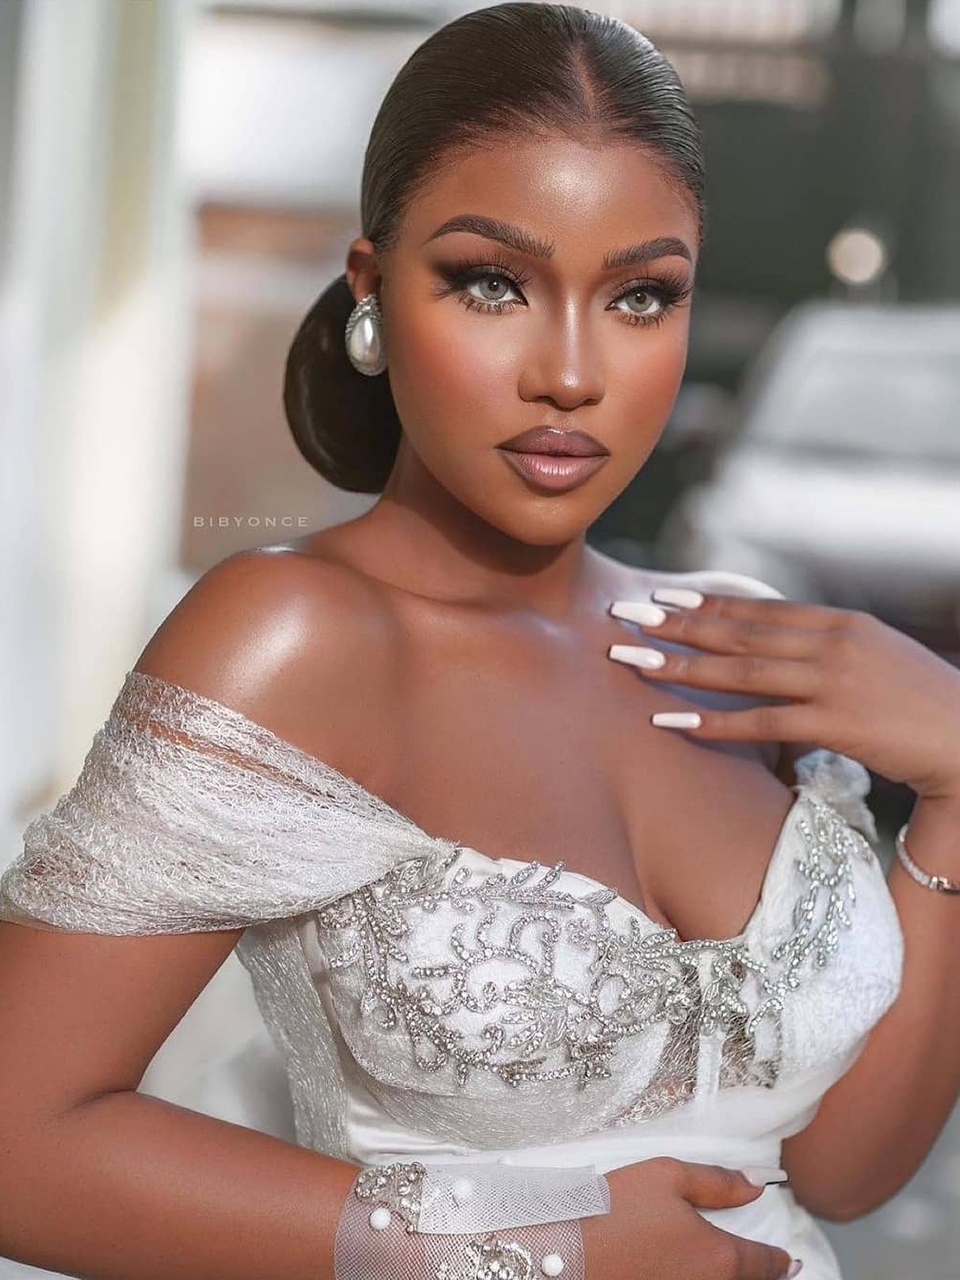 Beauty of the week : Bridal makeup created by Bibyonce